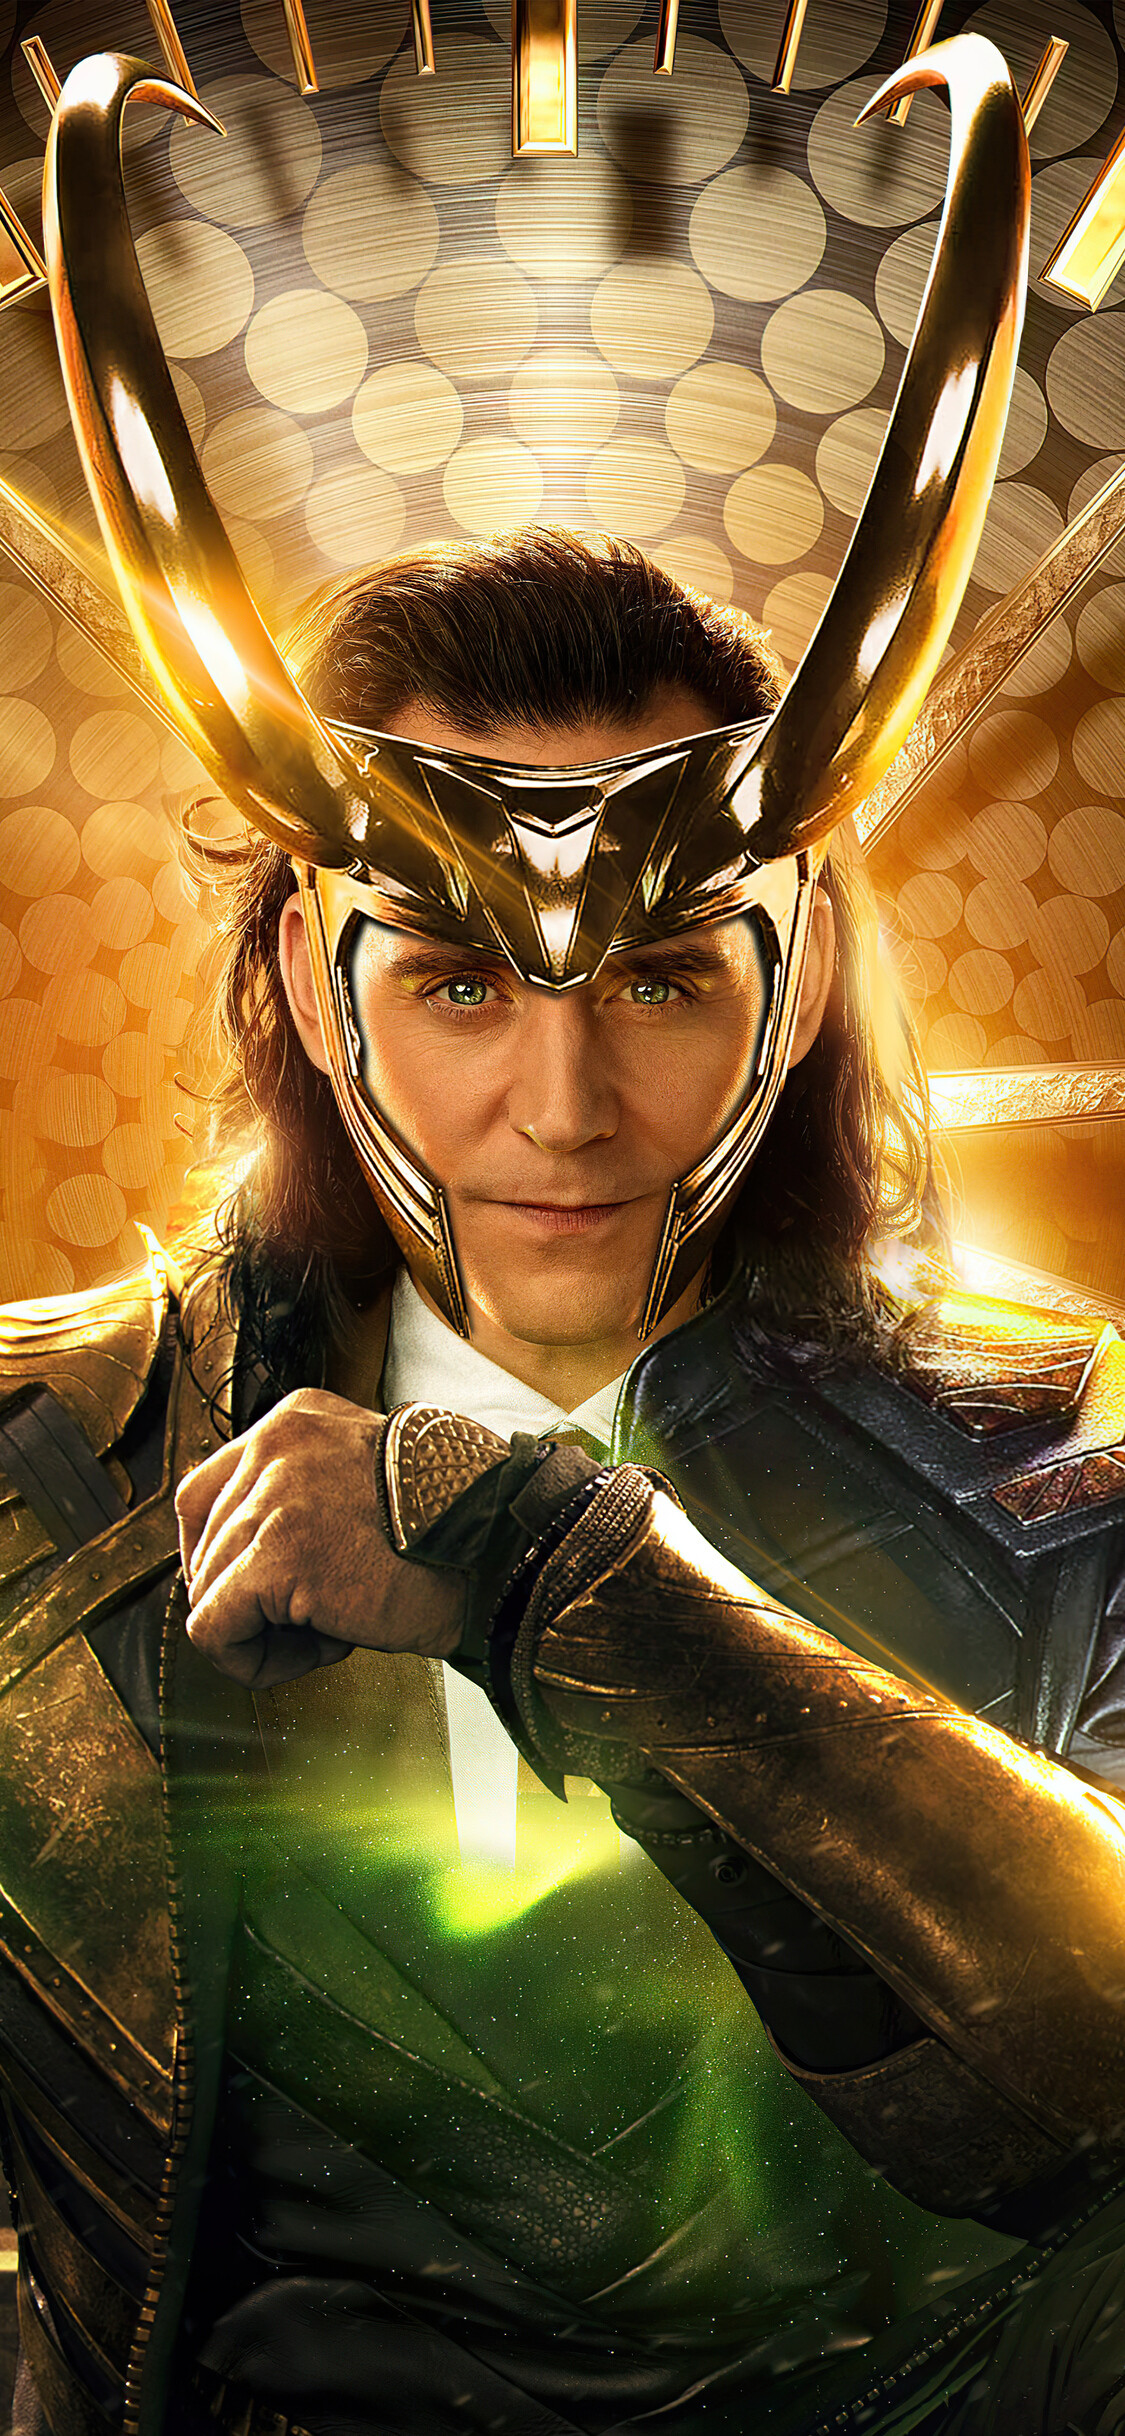 Loki: God Of Mischief, The biological son of Laufey, King of the Frost Giants. 1130x2440 HD Background.